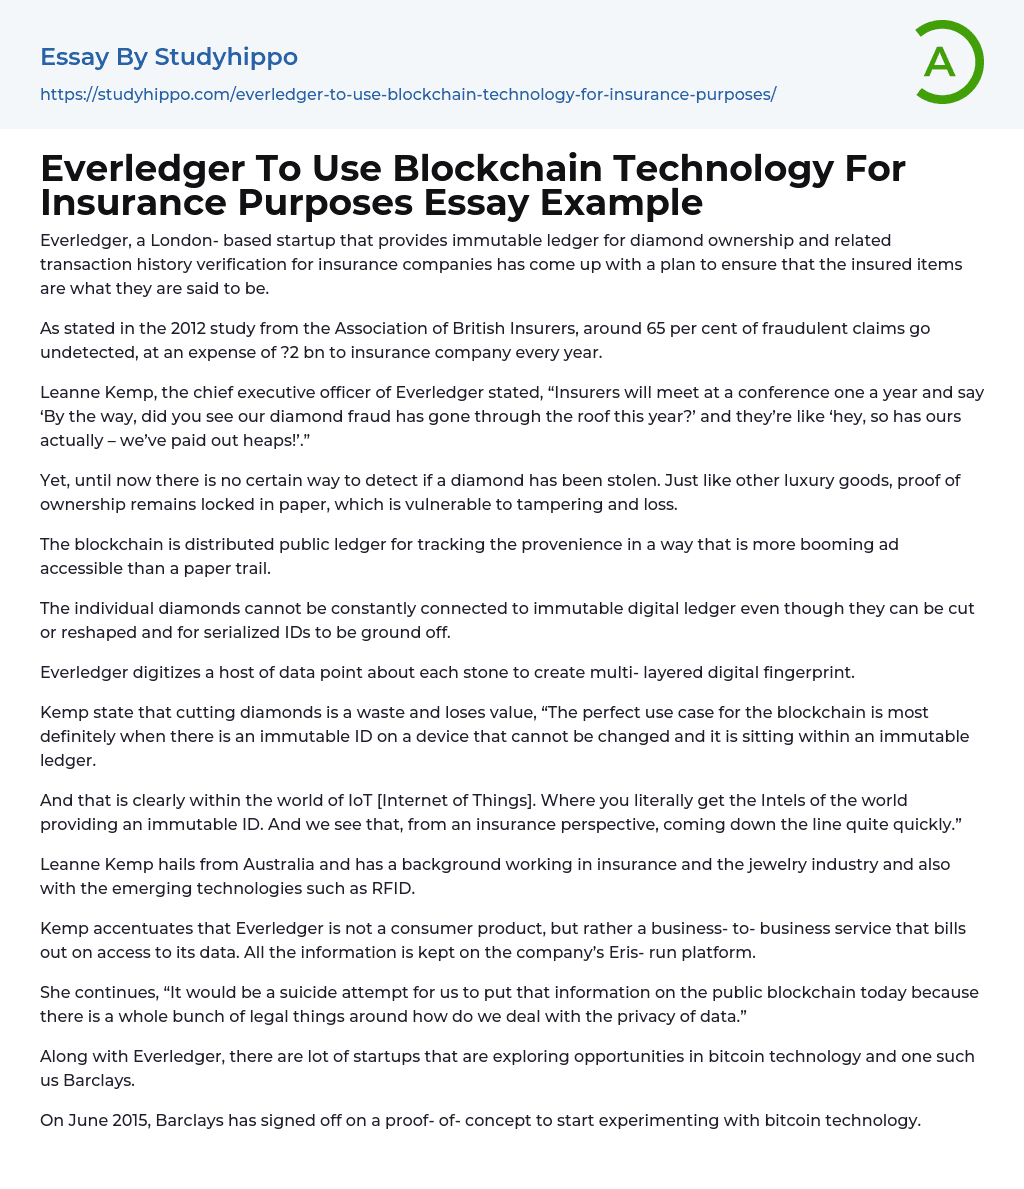 Everledger To Use Blockchain Technology For Insurance Purposes Essay Example